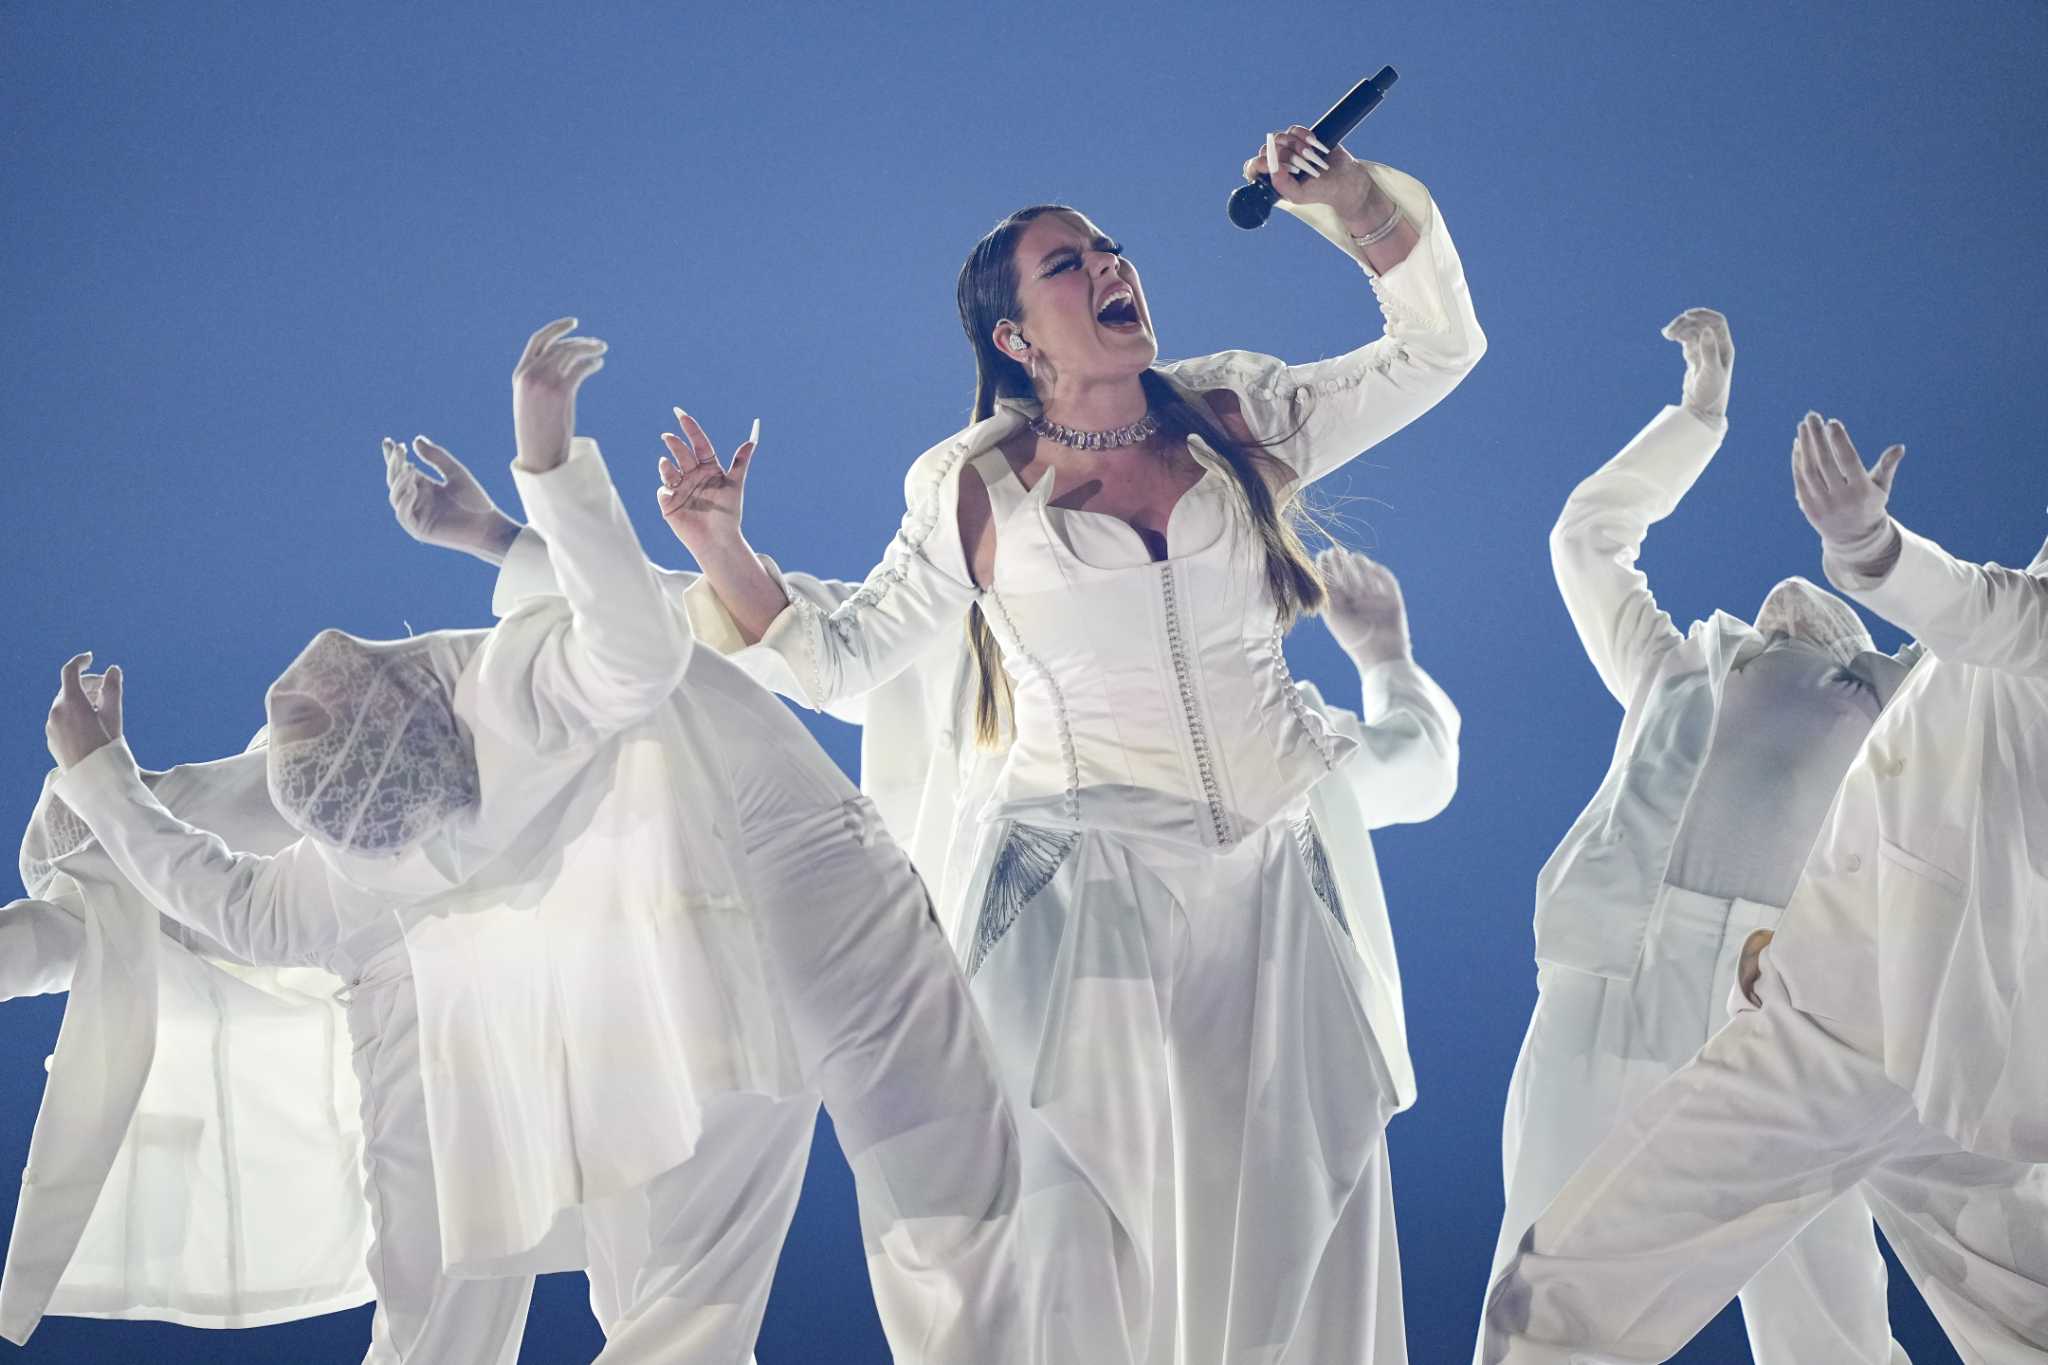 The Eurovision Song Contest kicked off with pop and protests as the war in Gaza casts a shadow